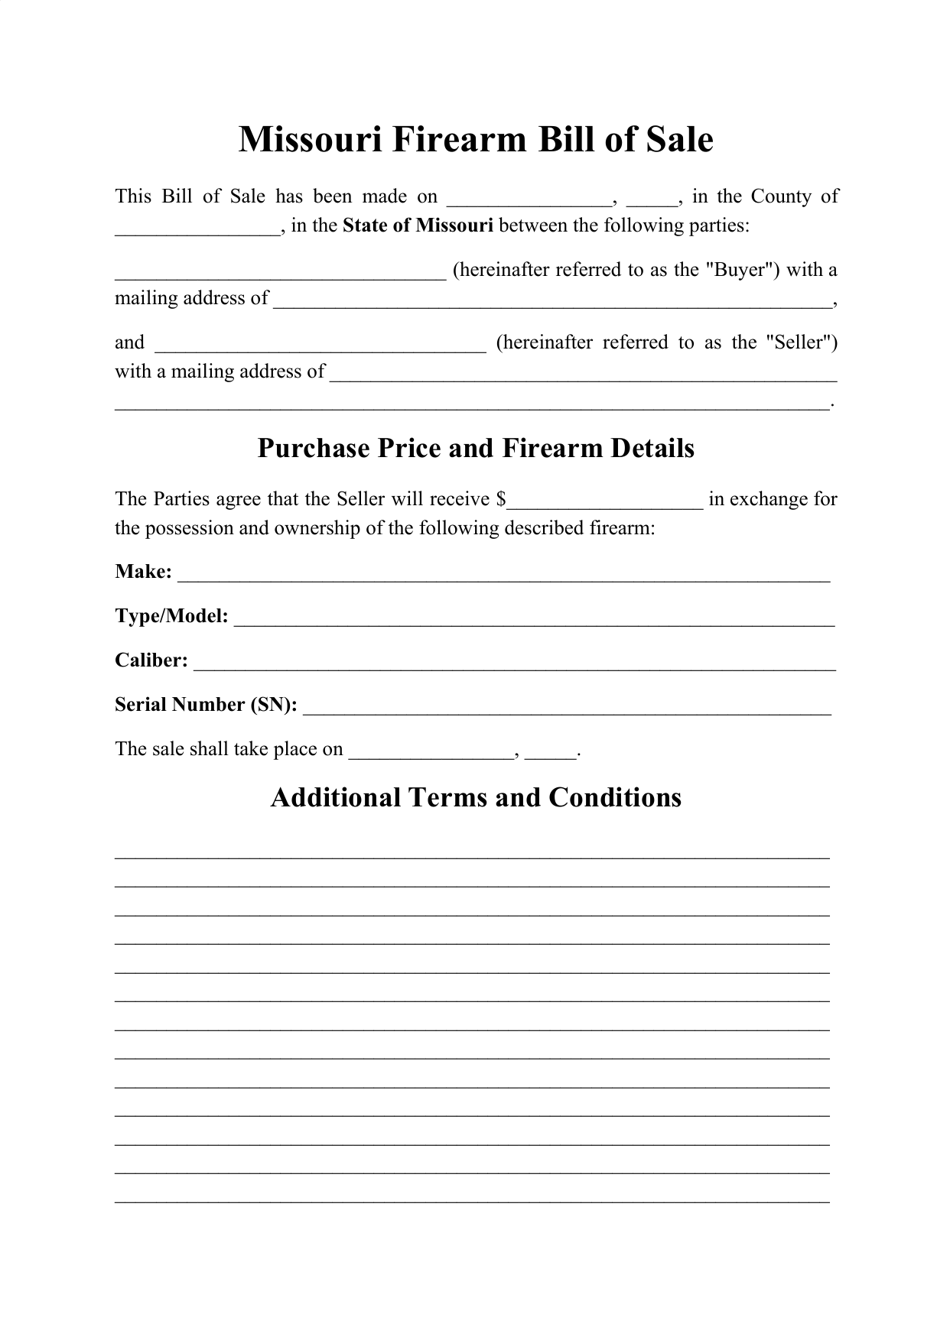 Missouri Firearm Bill of Sale Form Fill Out, Sign Online and Download